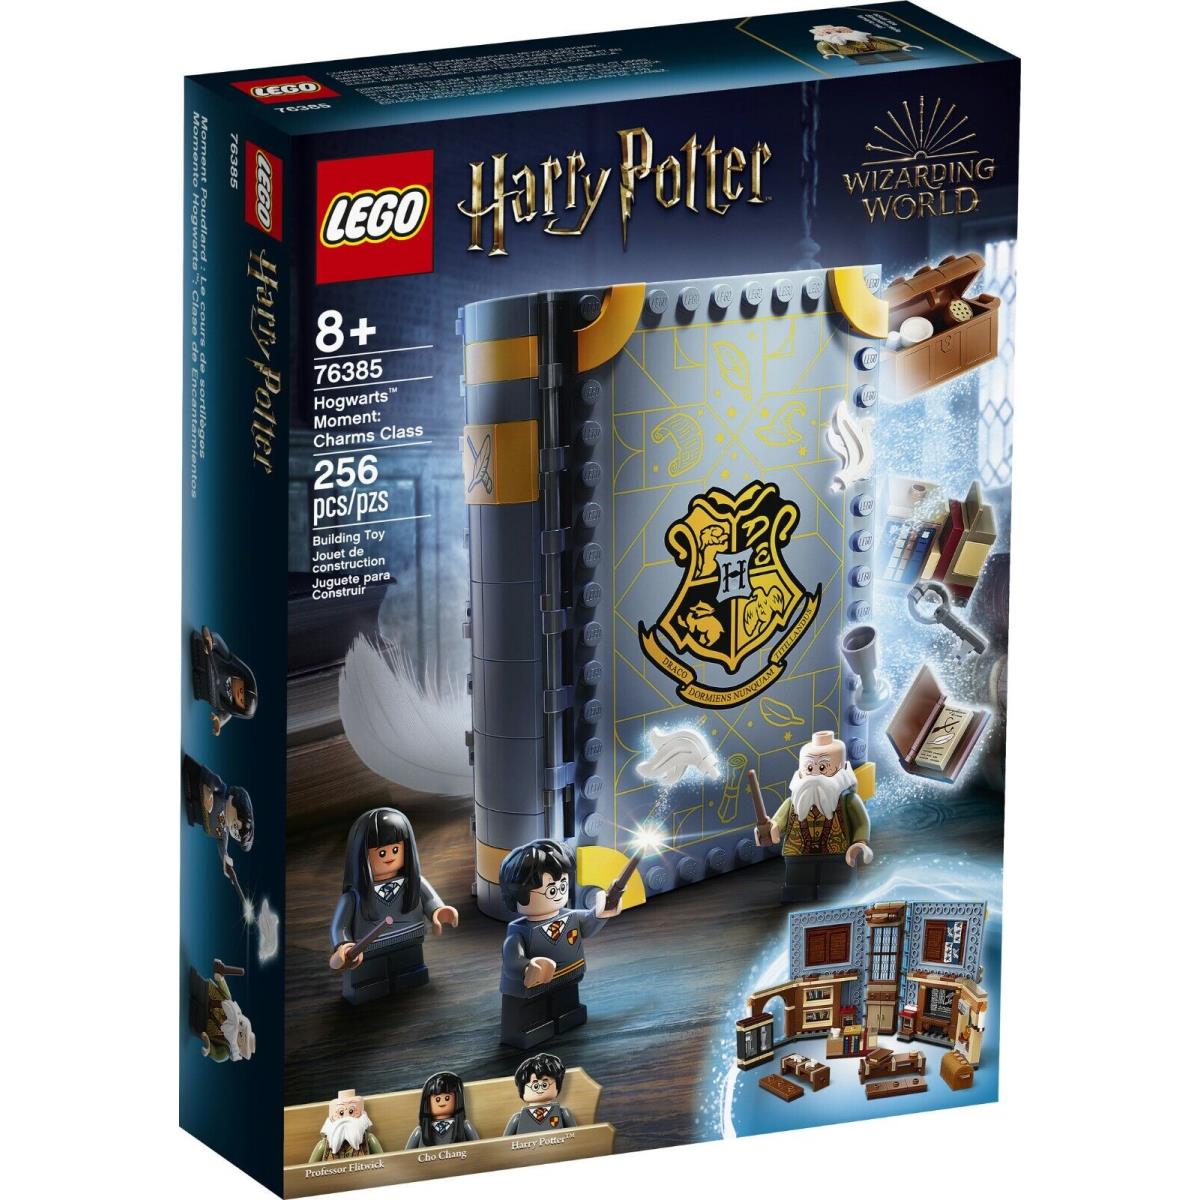 Hogwarts Moment: Charms Class Lego Harry Potter 76385 Retired